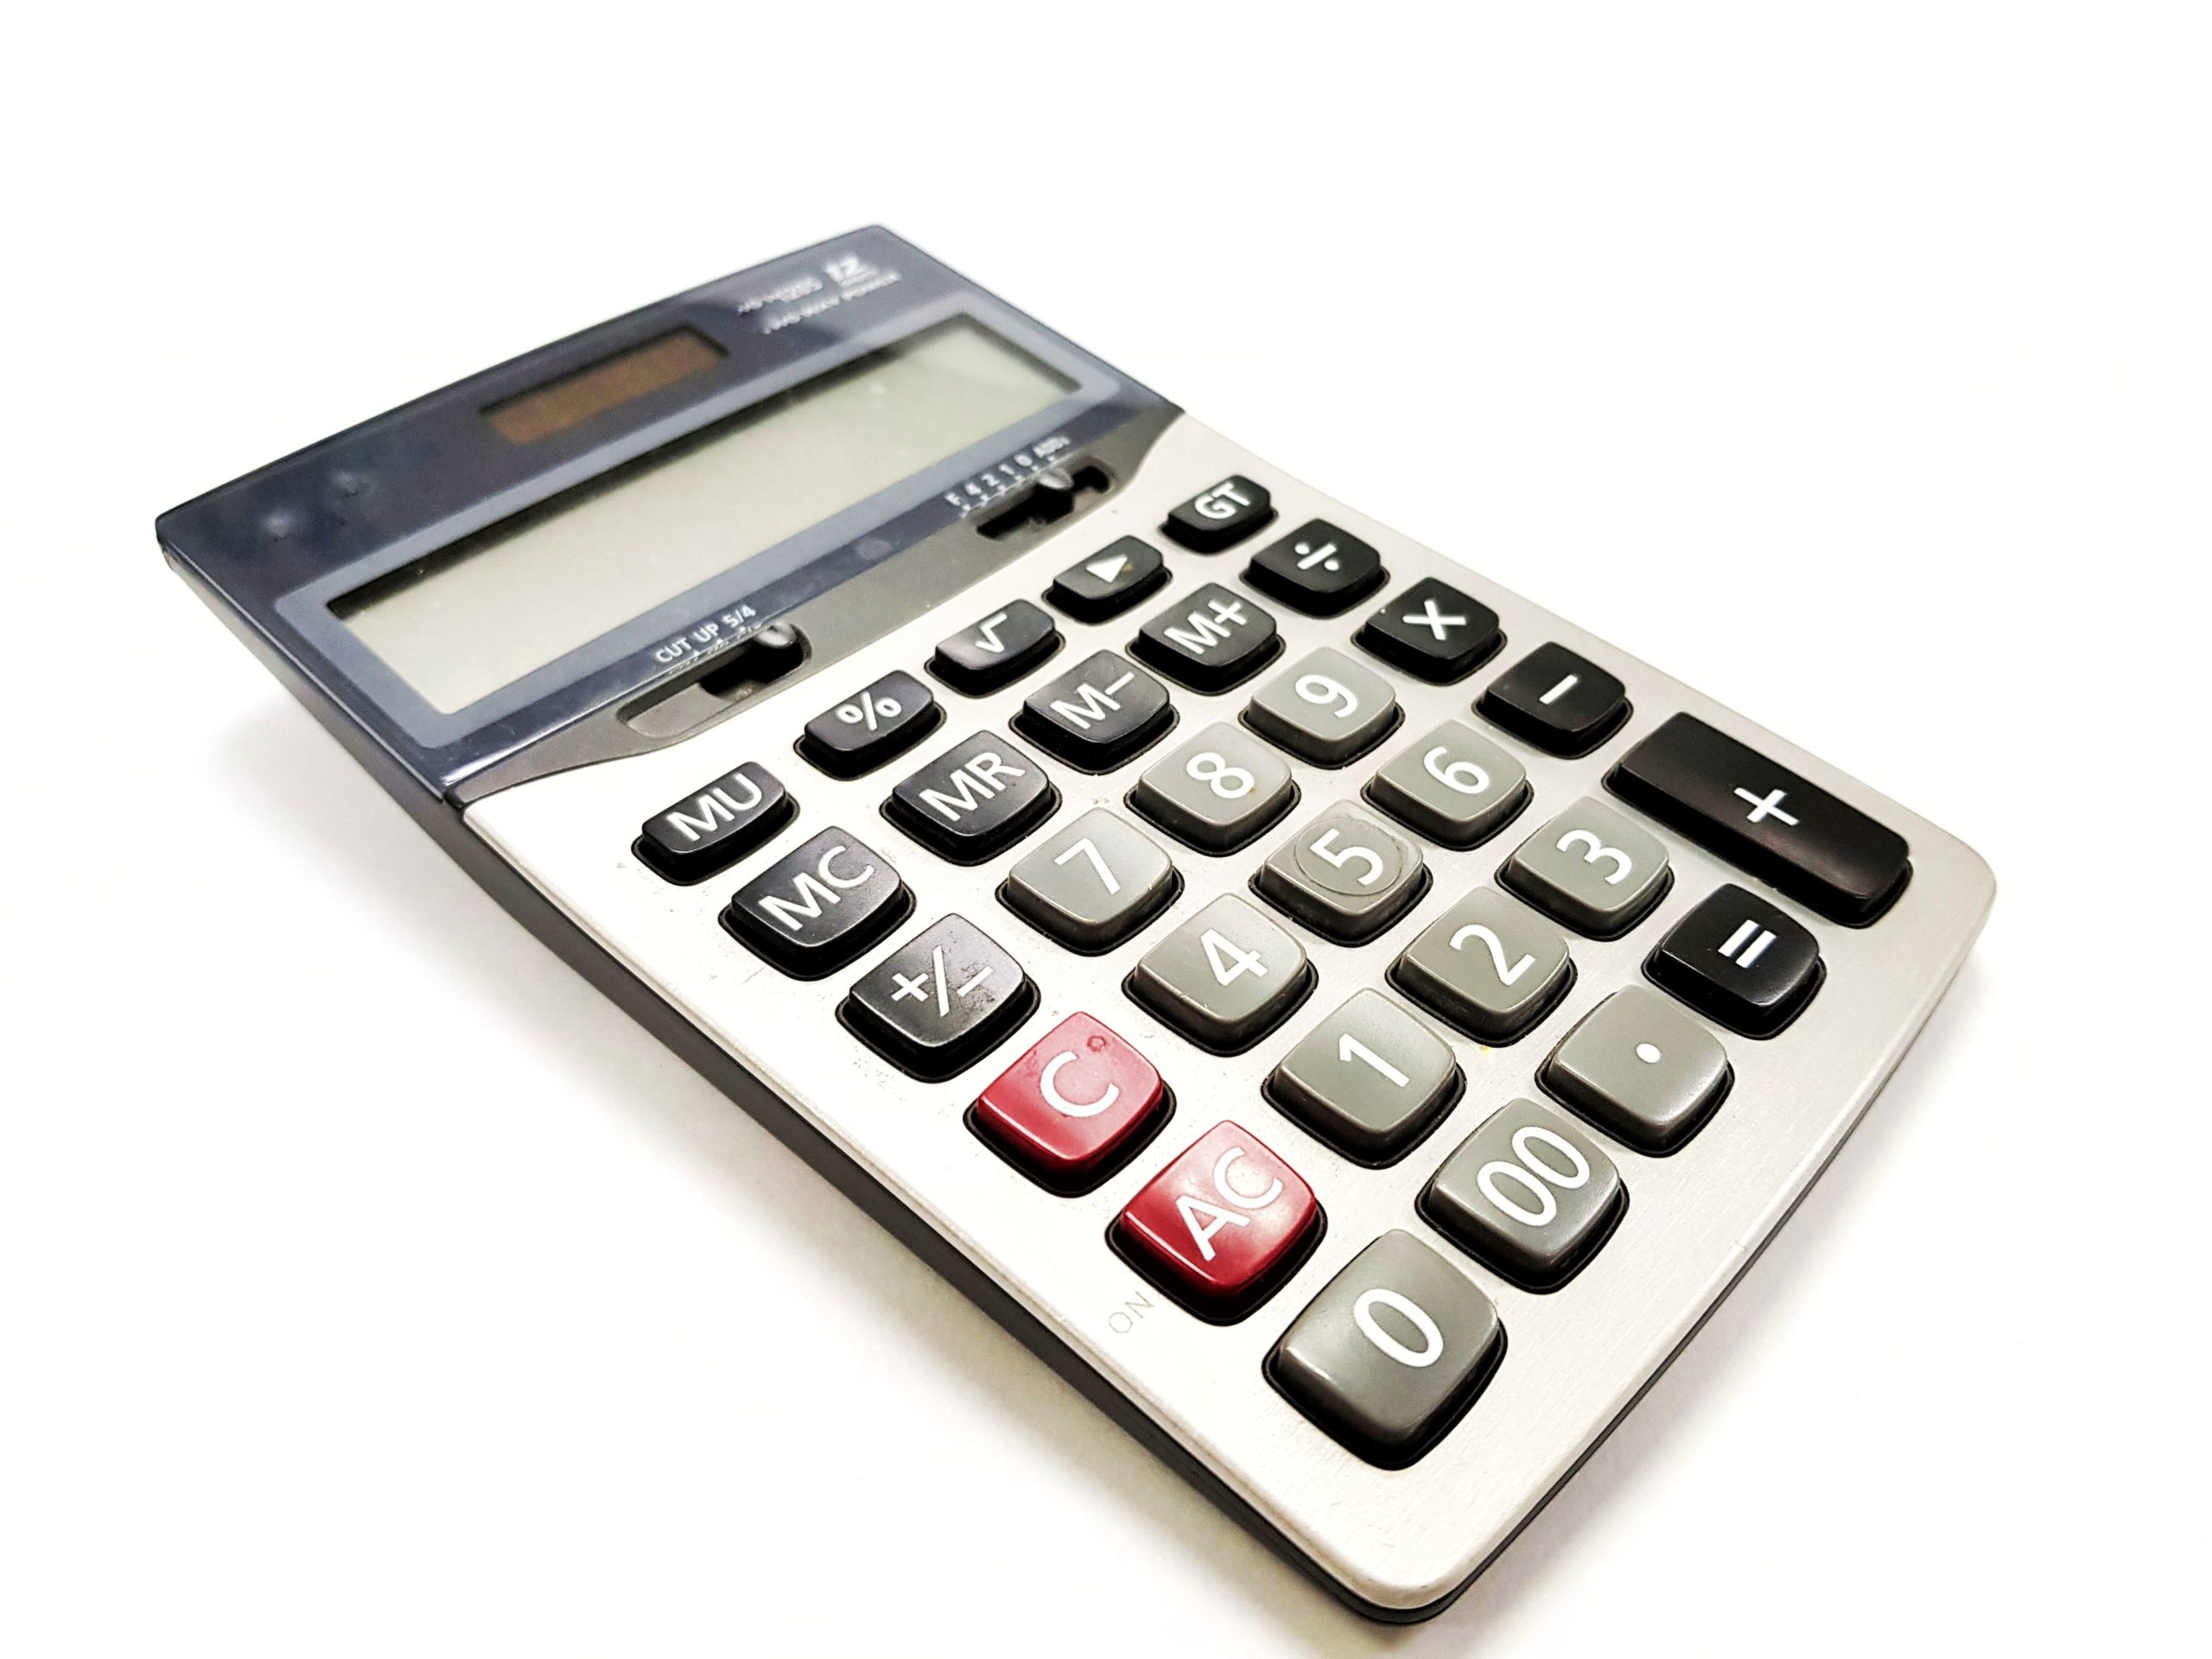 Top 5 Calculators On The Web Today